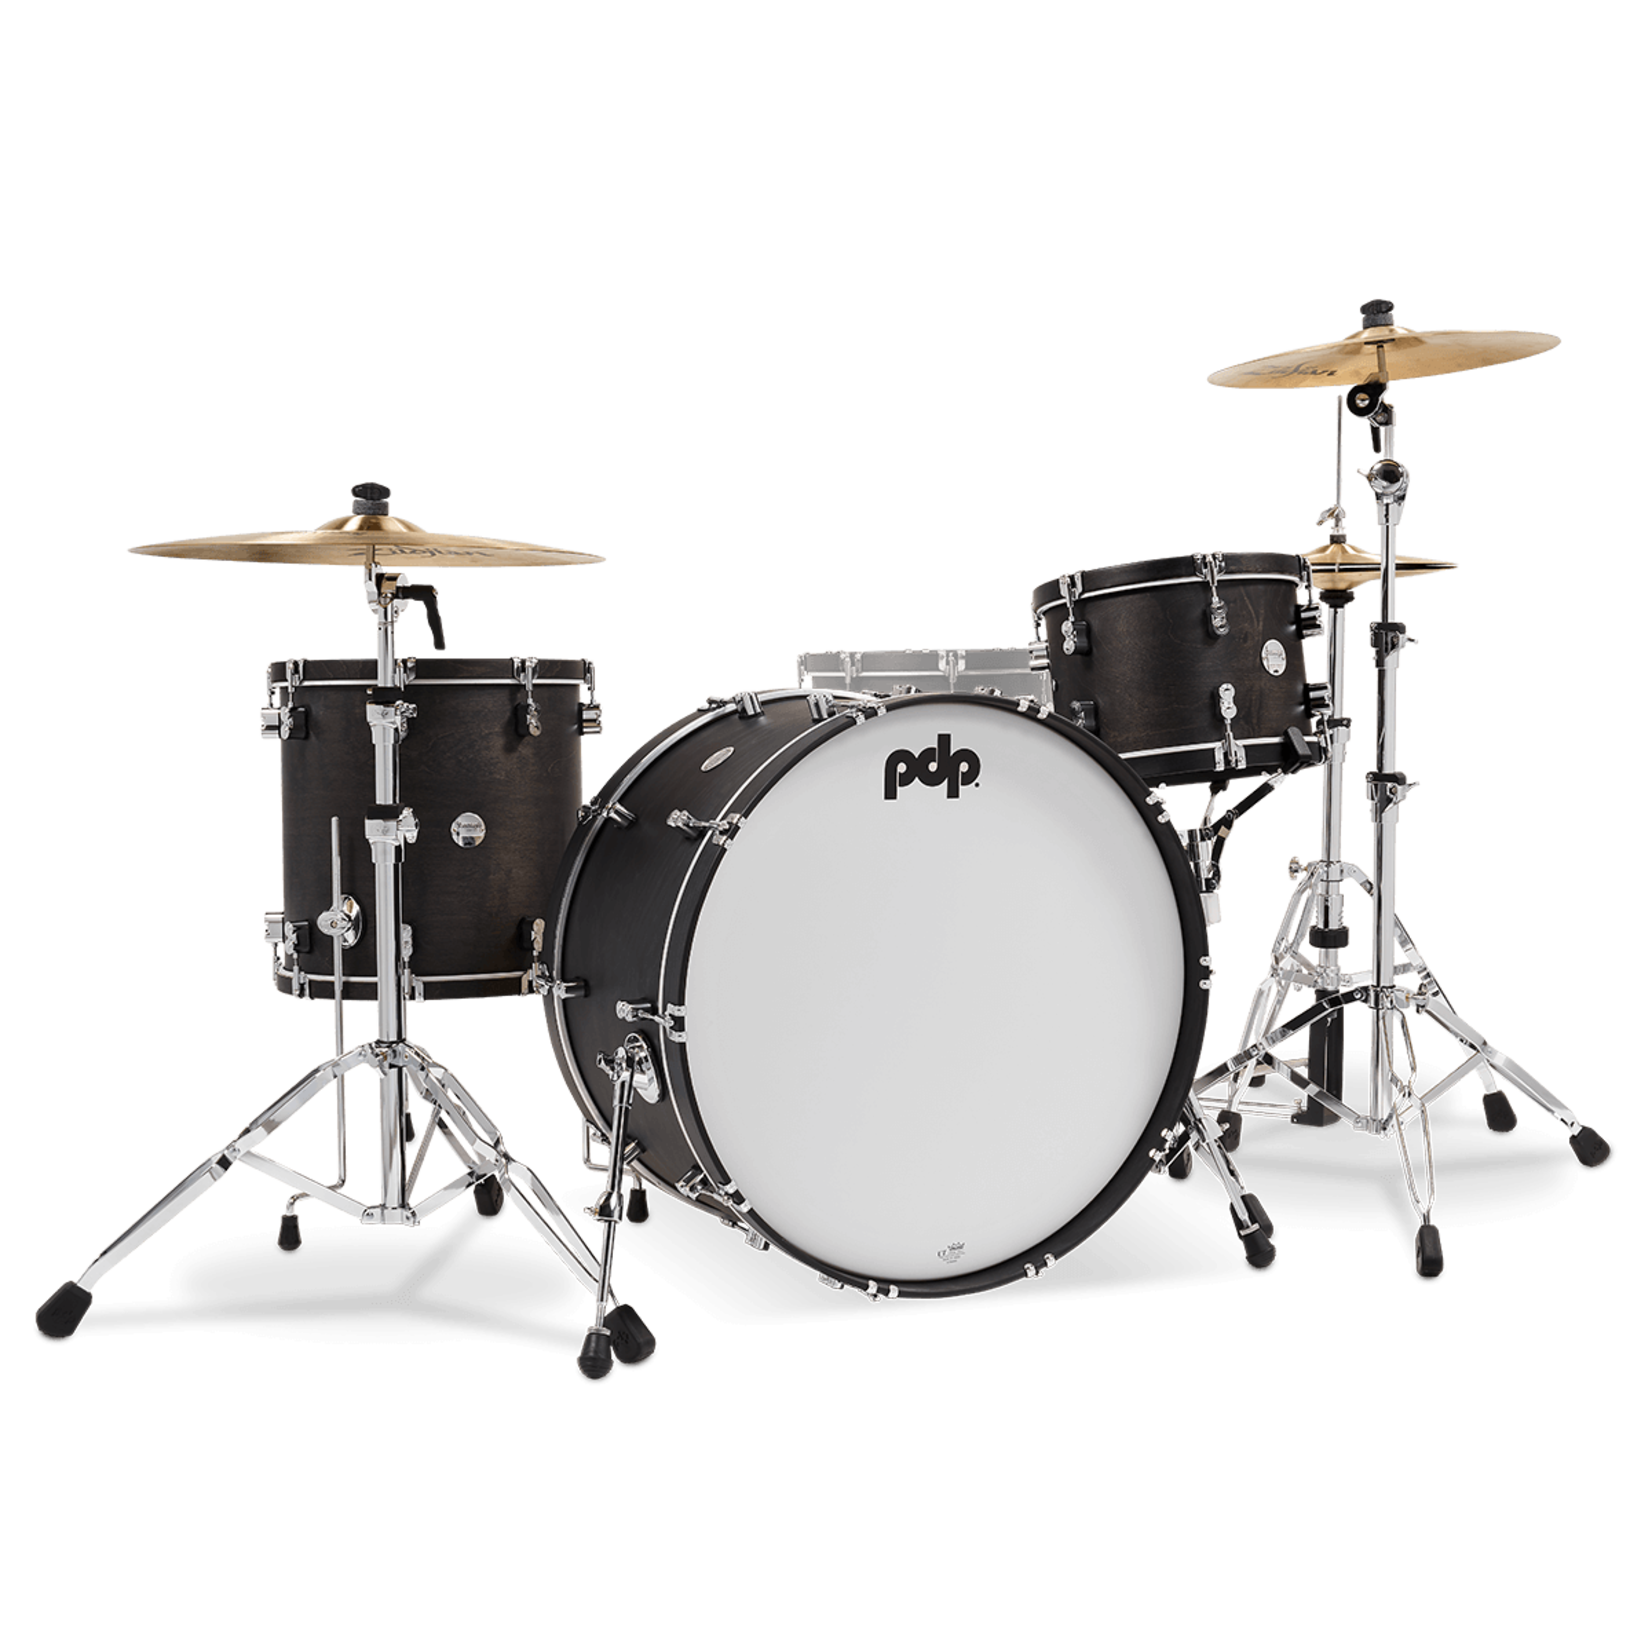 PDP PDP Concept Maple Classic 3-Piece Shell Pack 13/16/26 (Ebony Stain)